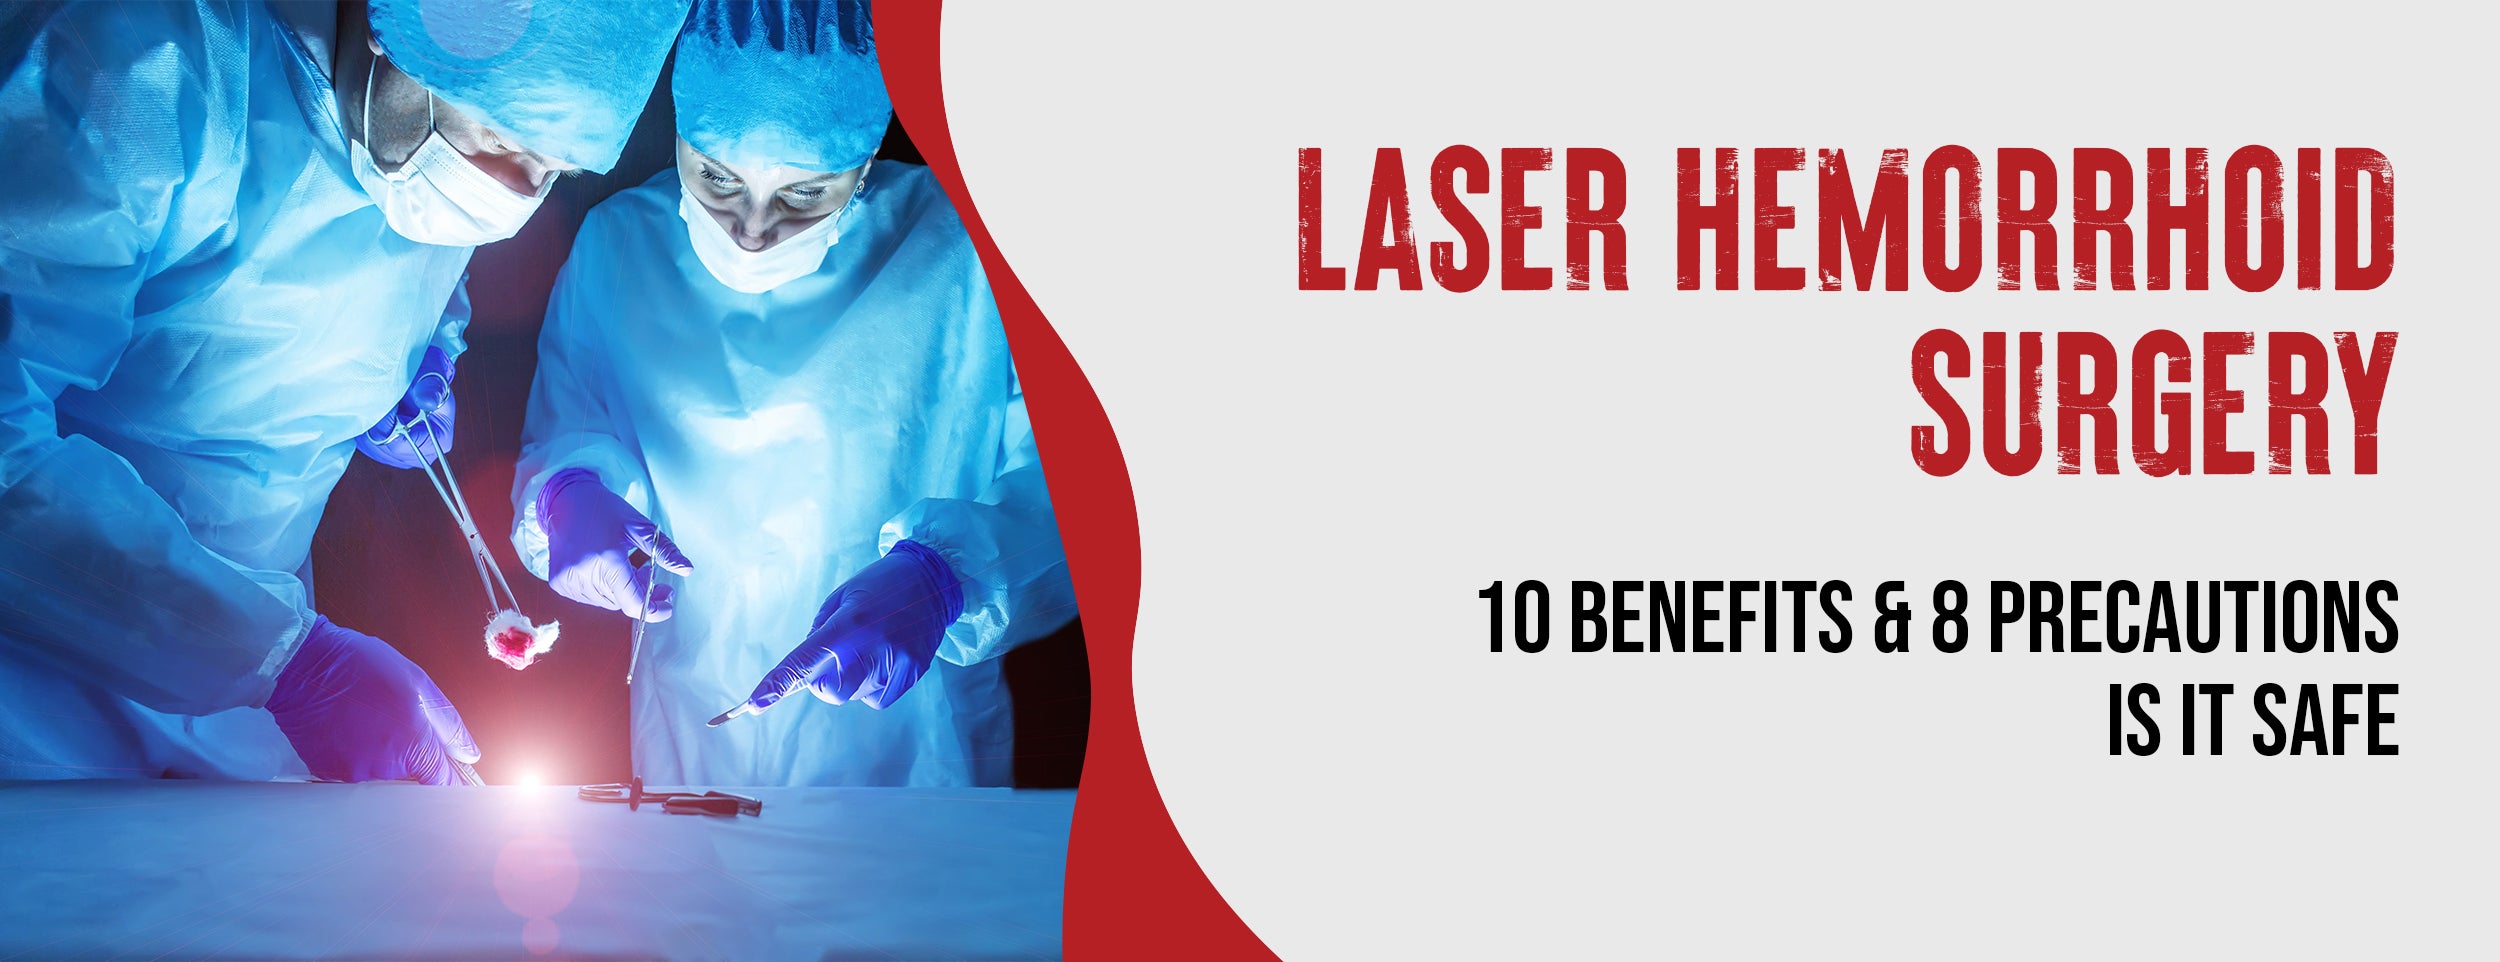 The 10 Benefits and 8 Precautions of Laser Hemorrhoids Surgery